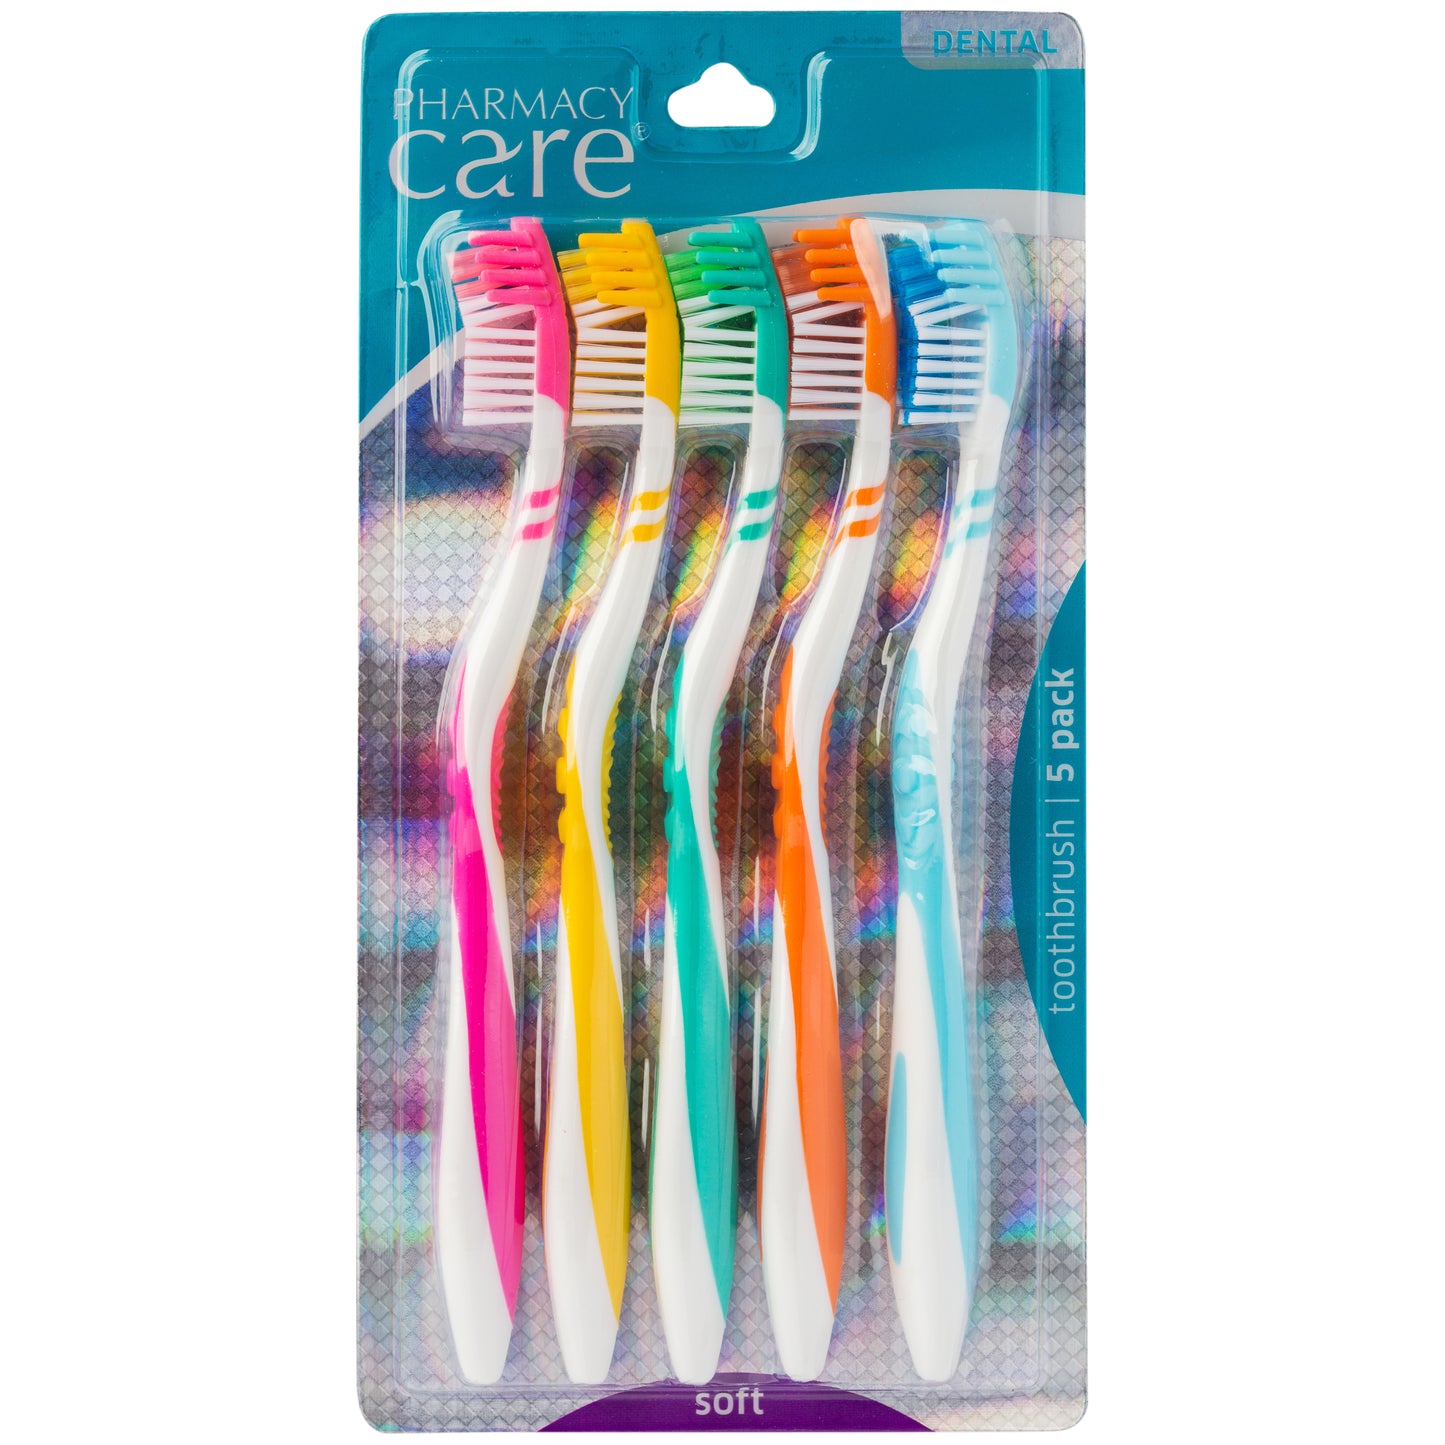 Pharmacy Care Toothbrush Soft 5 Pack